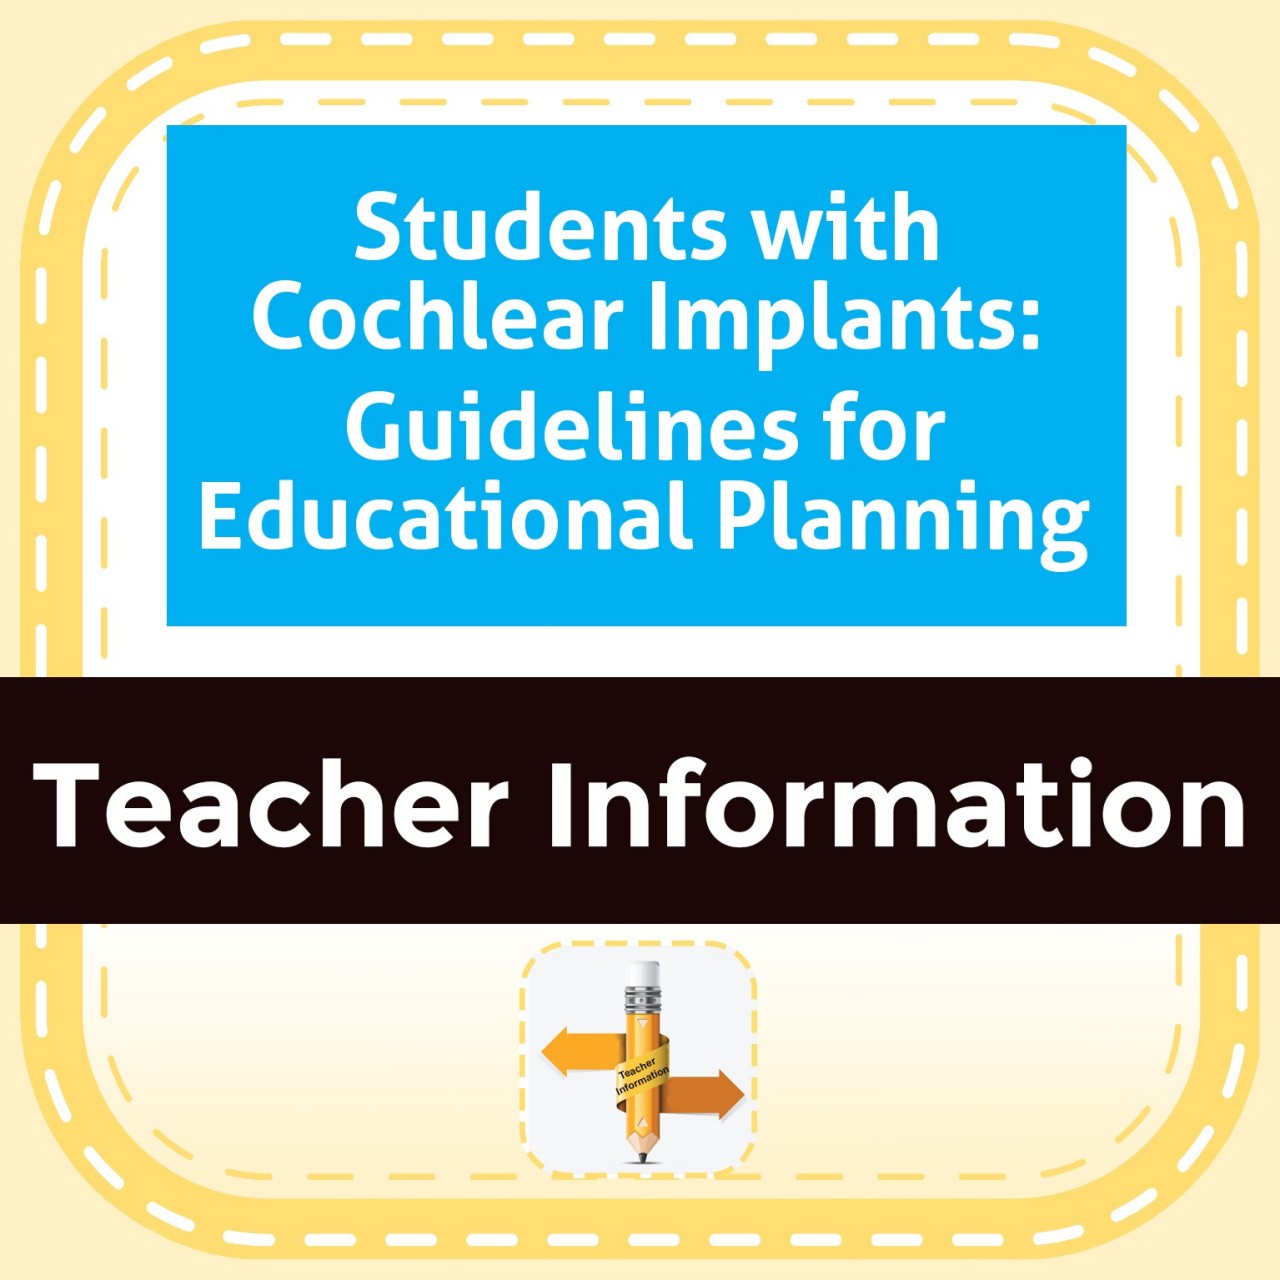 Students with Cochlear Implants: Guidelines for Educational Planning